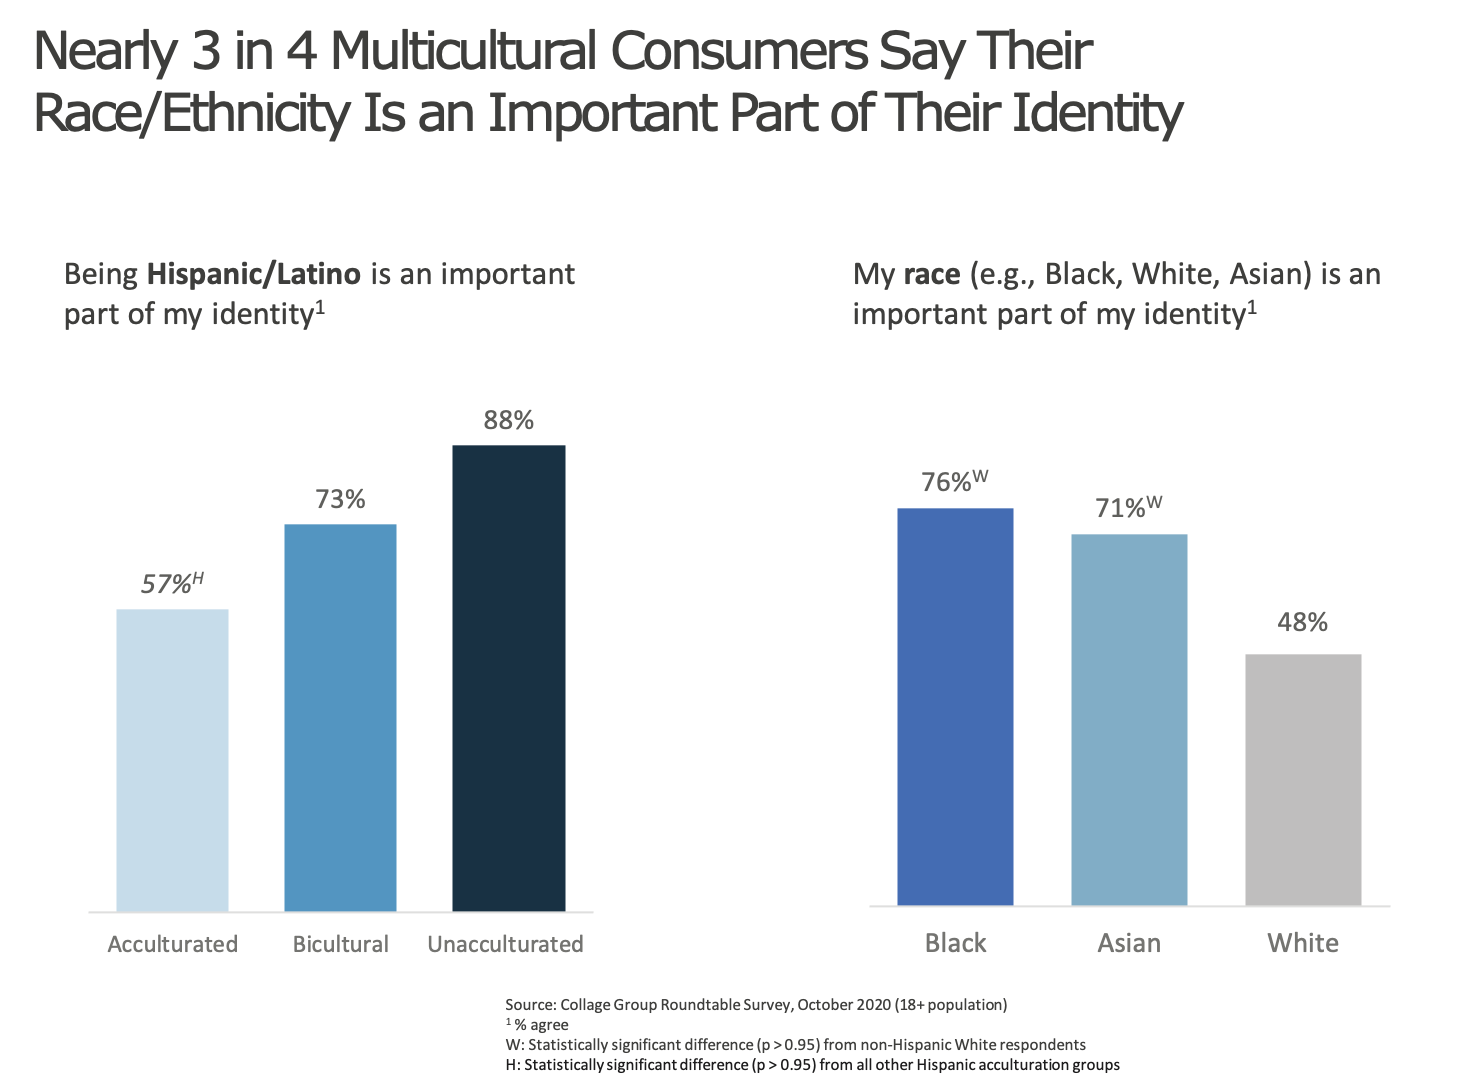 3/4 consumers say their race is important to their identity